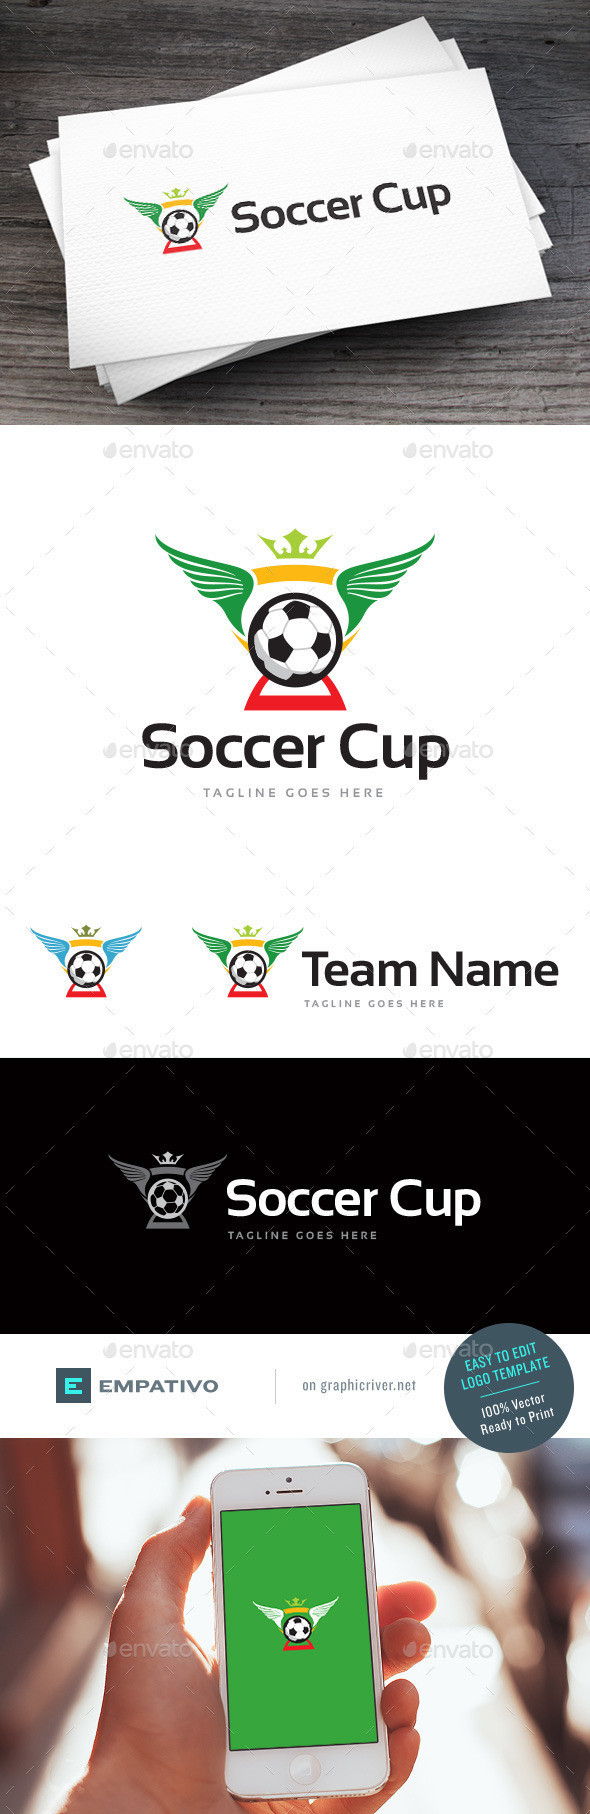 Soccer cup logo template